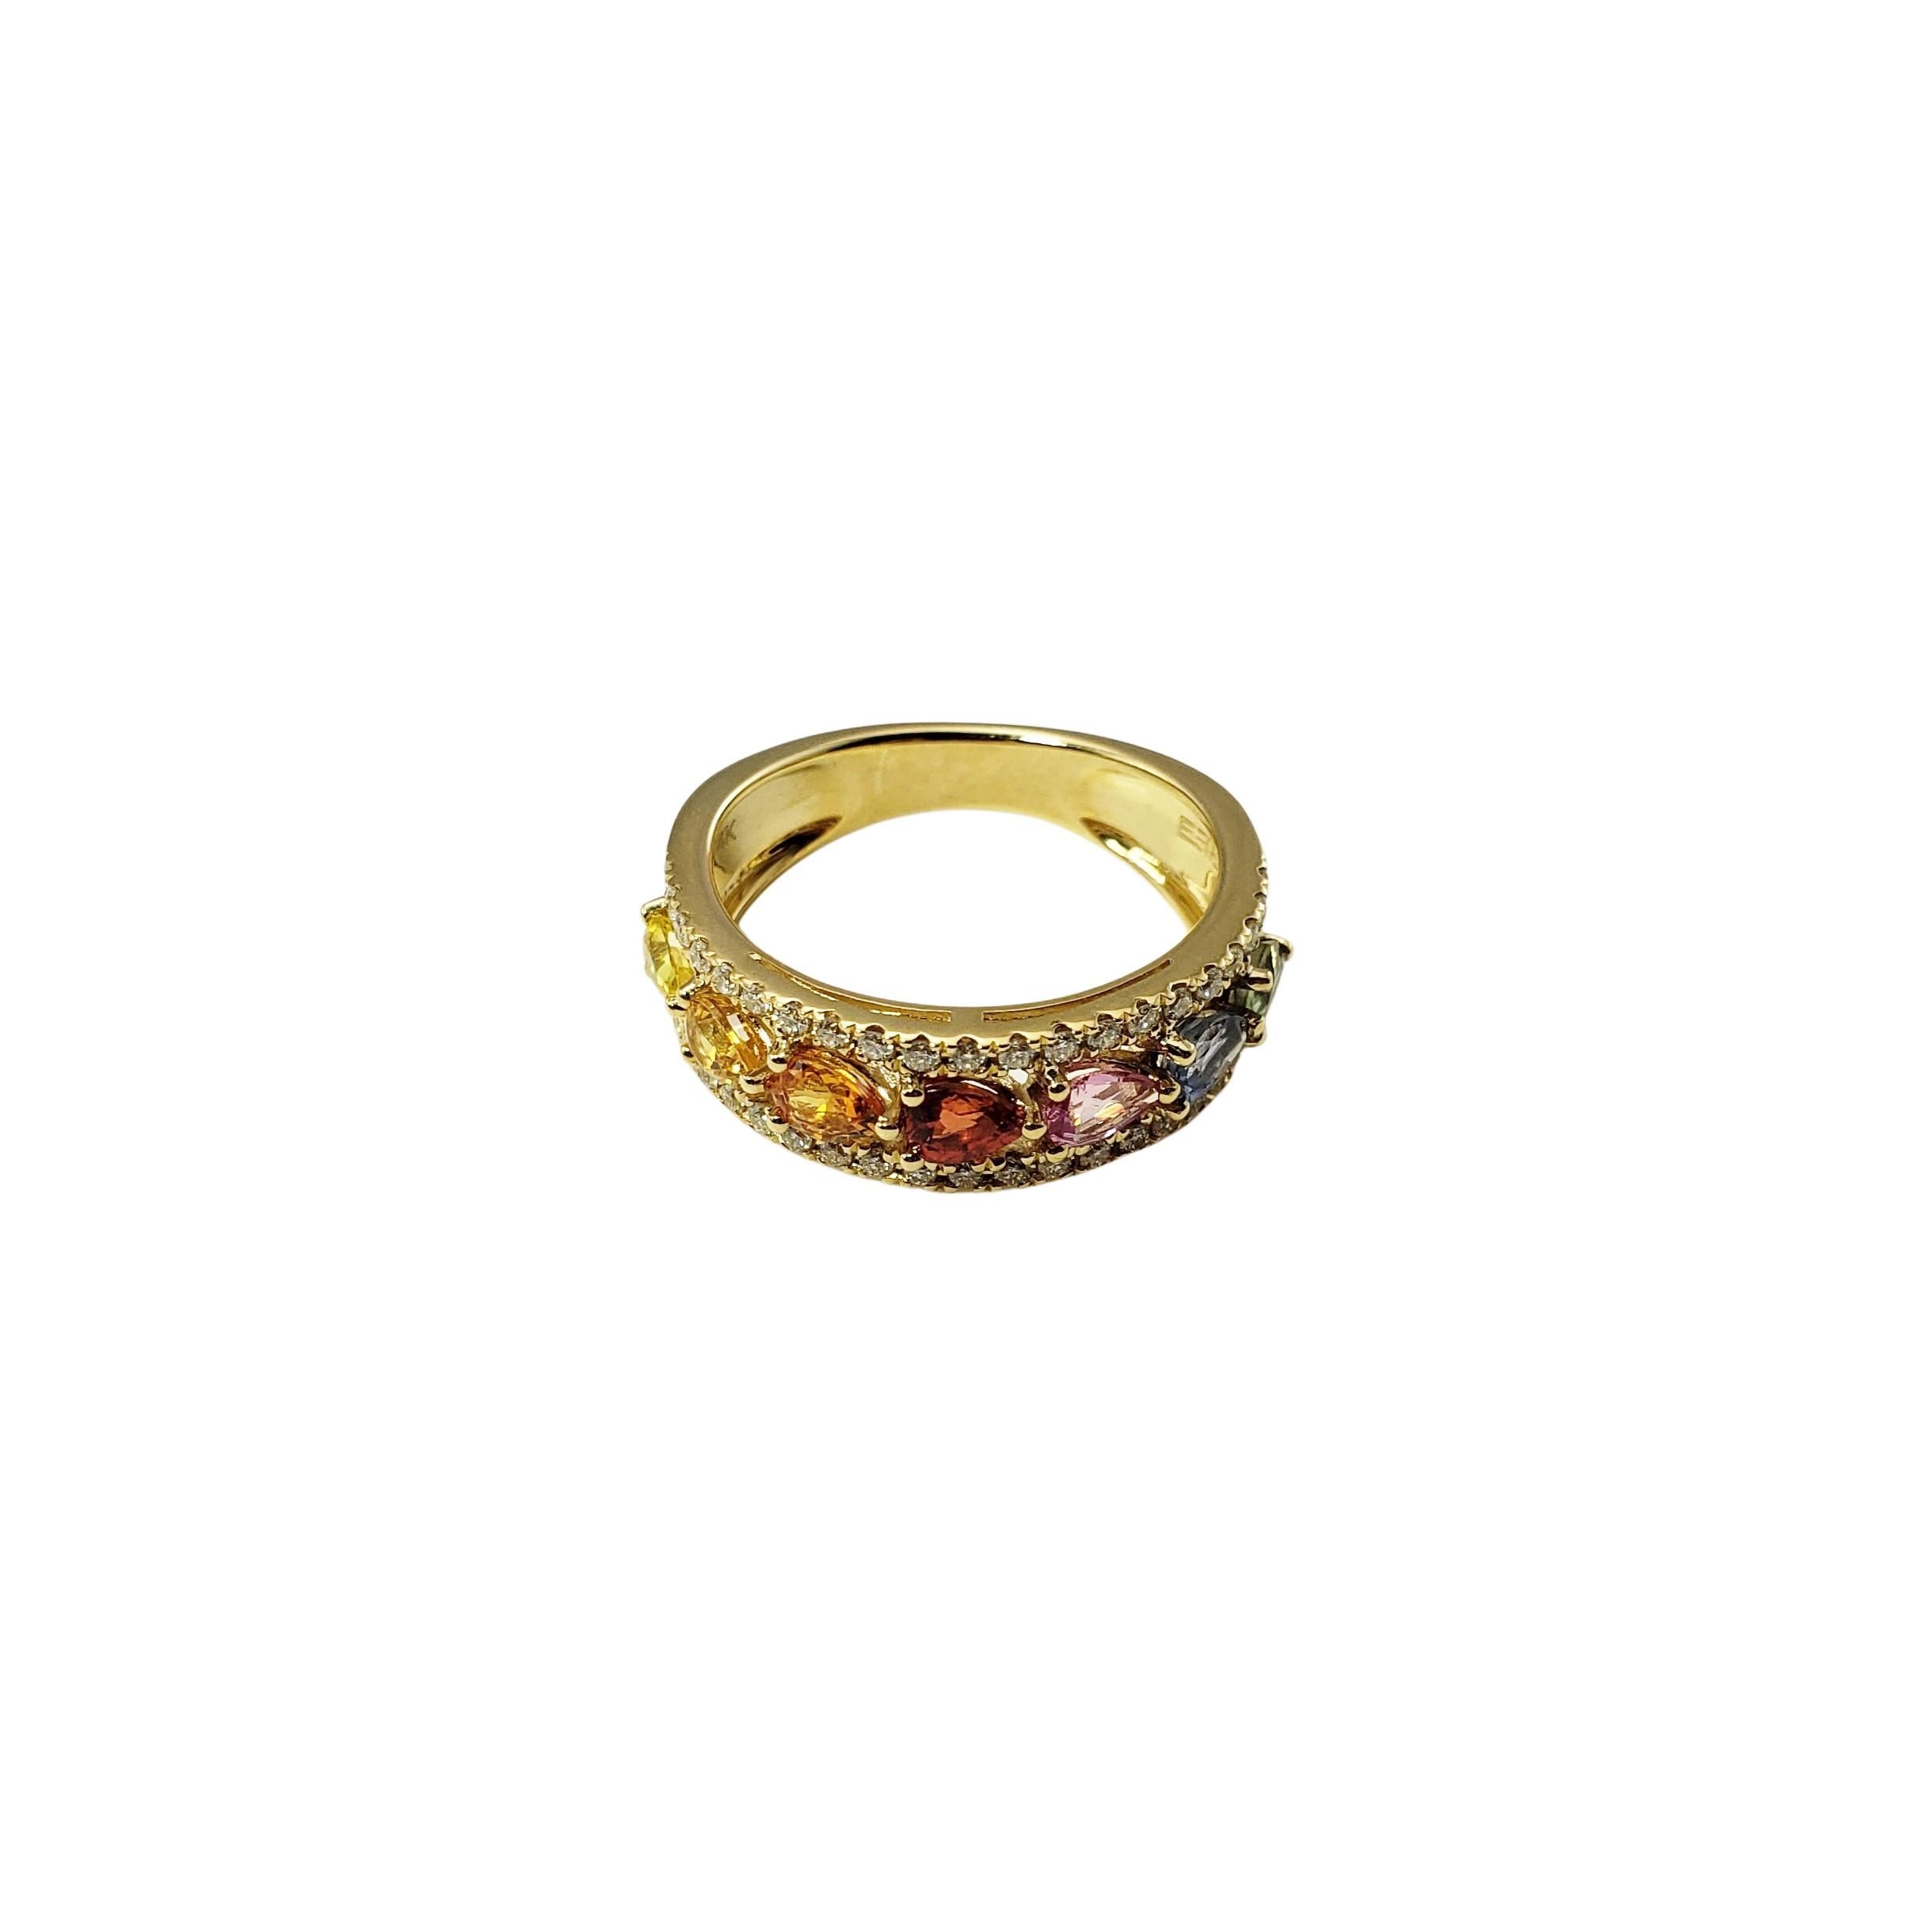 14 Karat Yellow Gold Multi-Colored Sapphire and Diamond Ring Size 6.75 GAI Certified-

This elegant ring features seven pear shaped multi-colored sapphires and 42 round brilliant cut diamonds set in classic 14K yellow gold.  Width:  6 mm.  Shank:  4